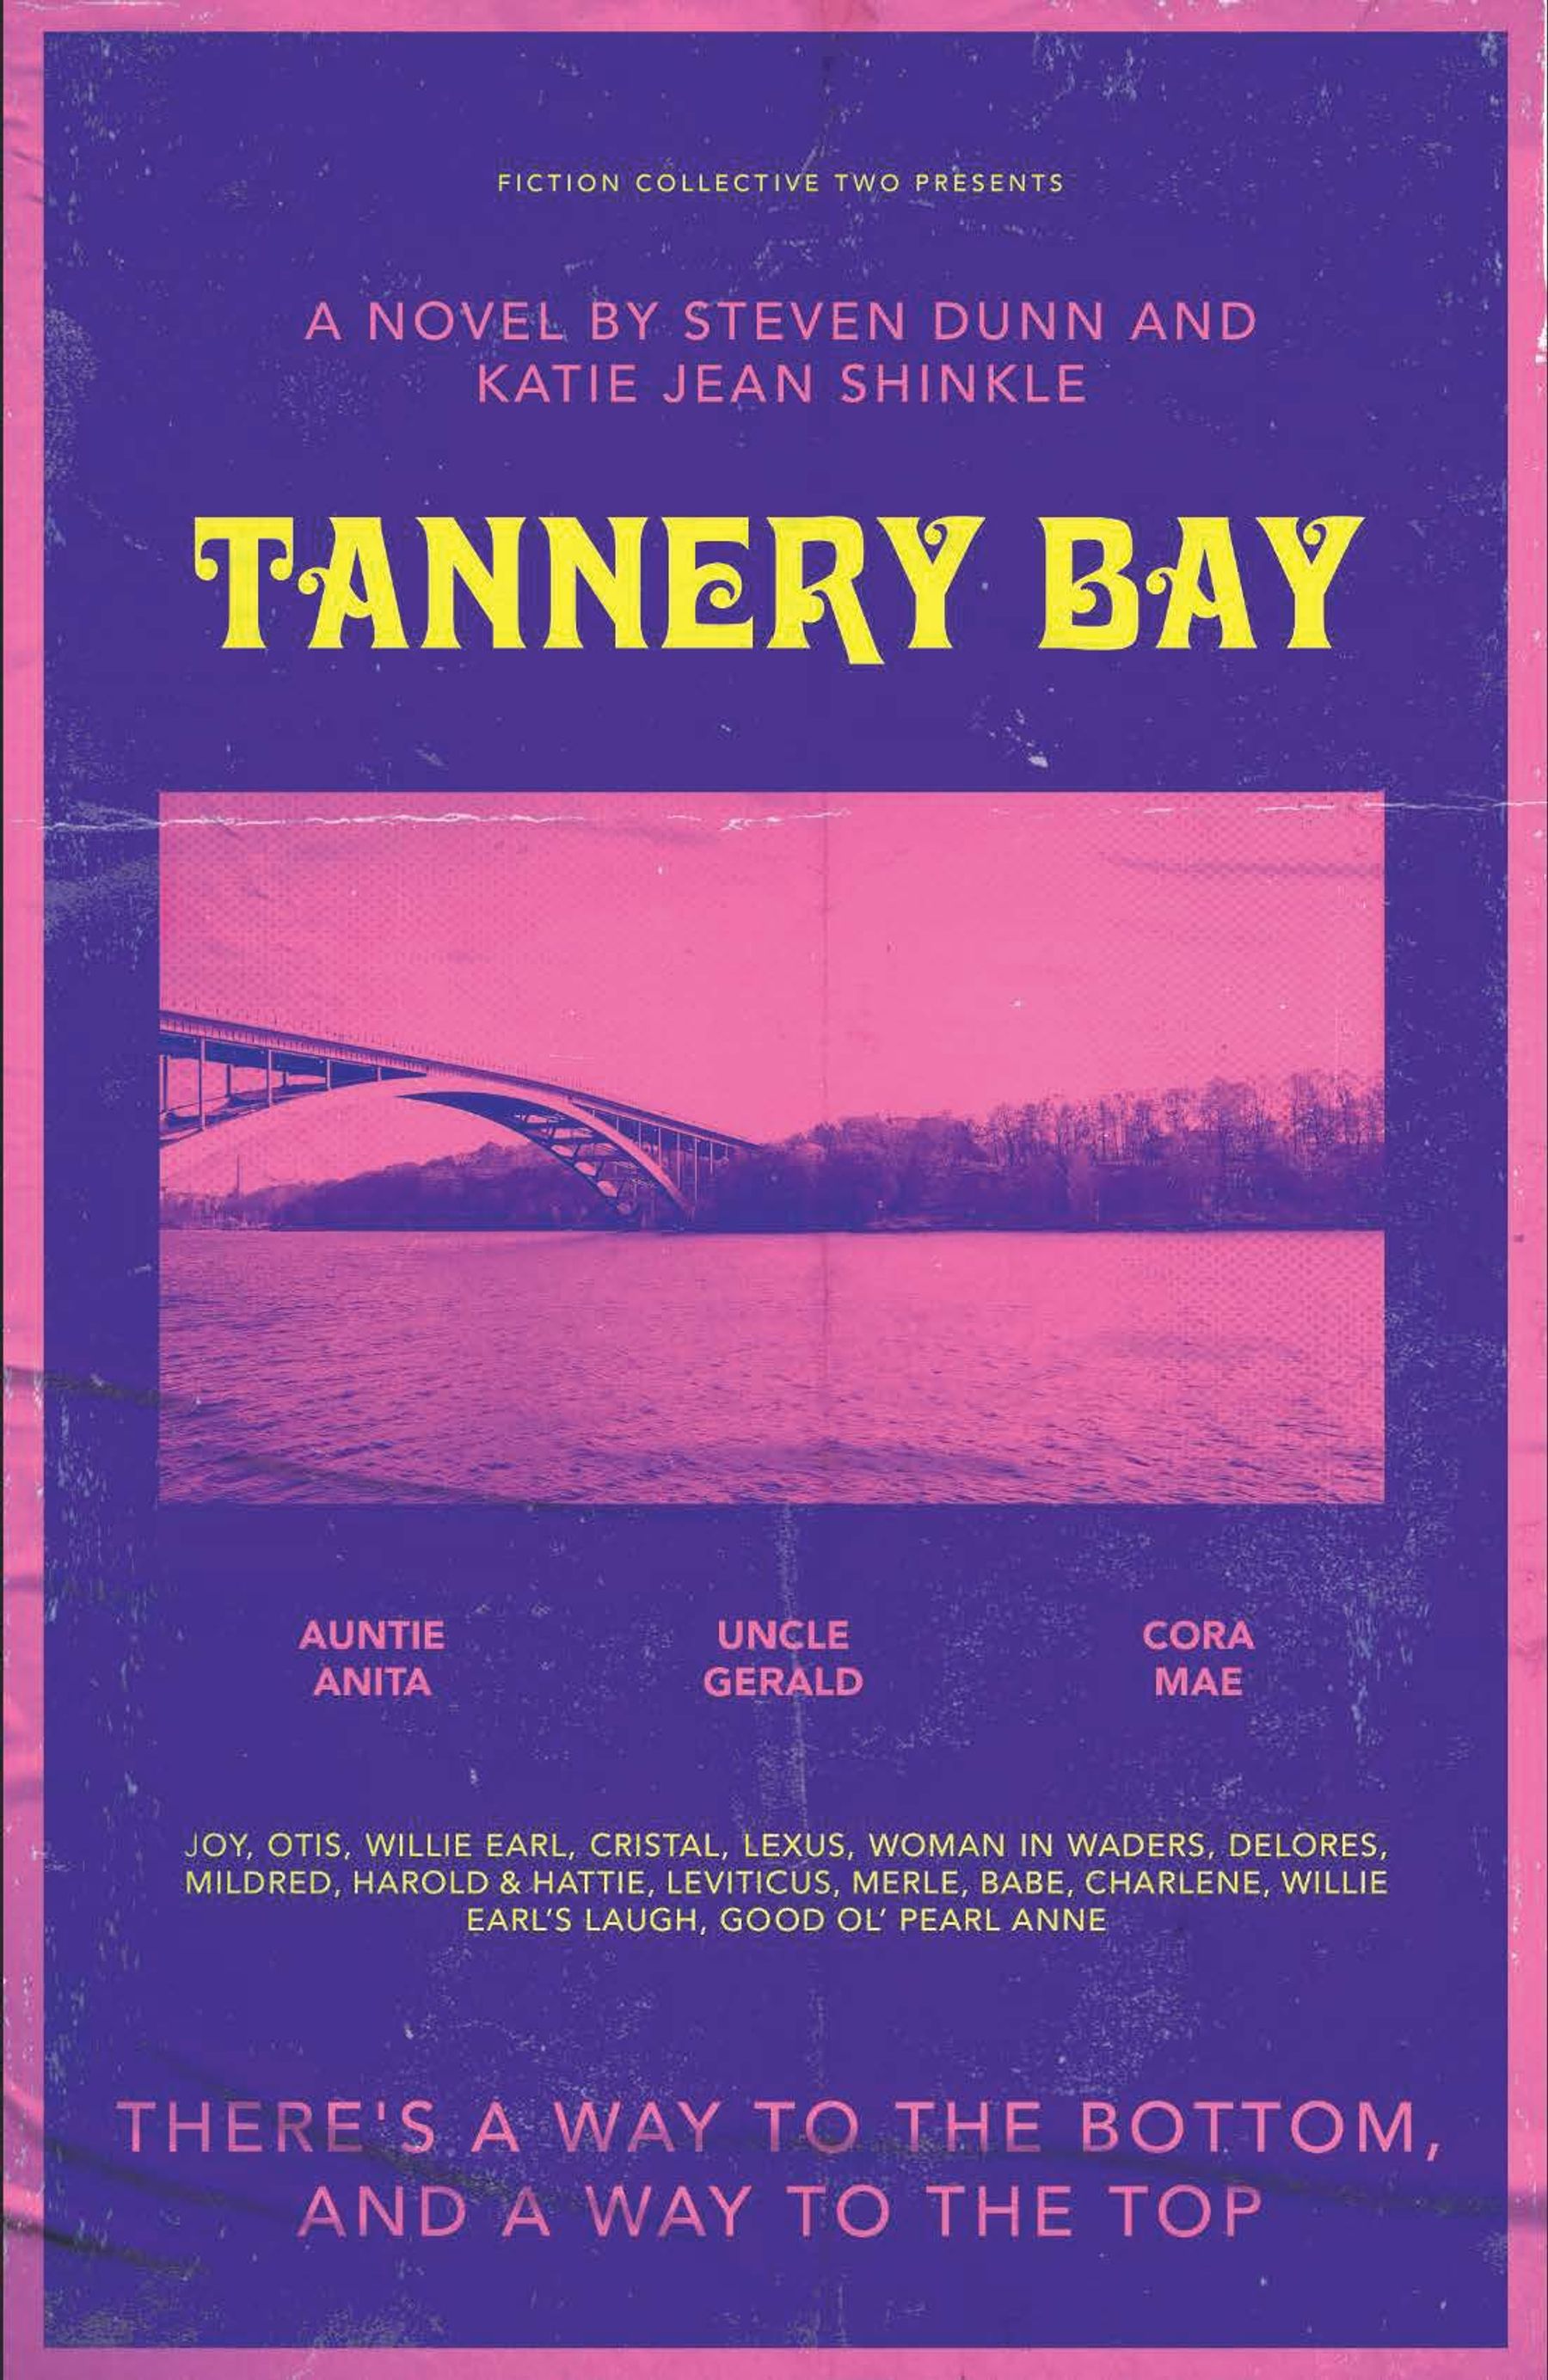 Steven Dunn and Katie Jean Shinkle -- "Tannery Bay"